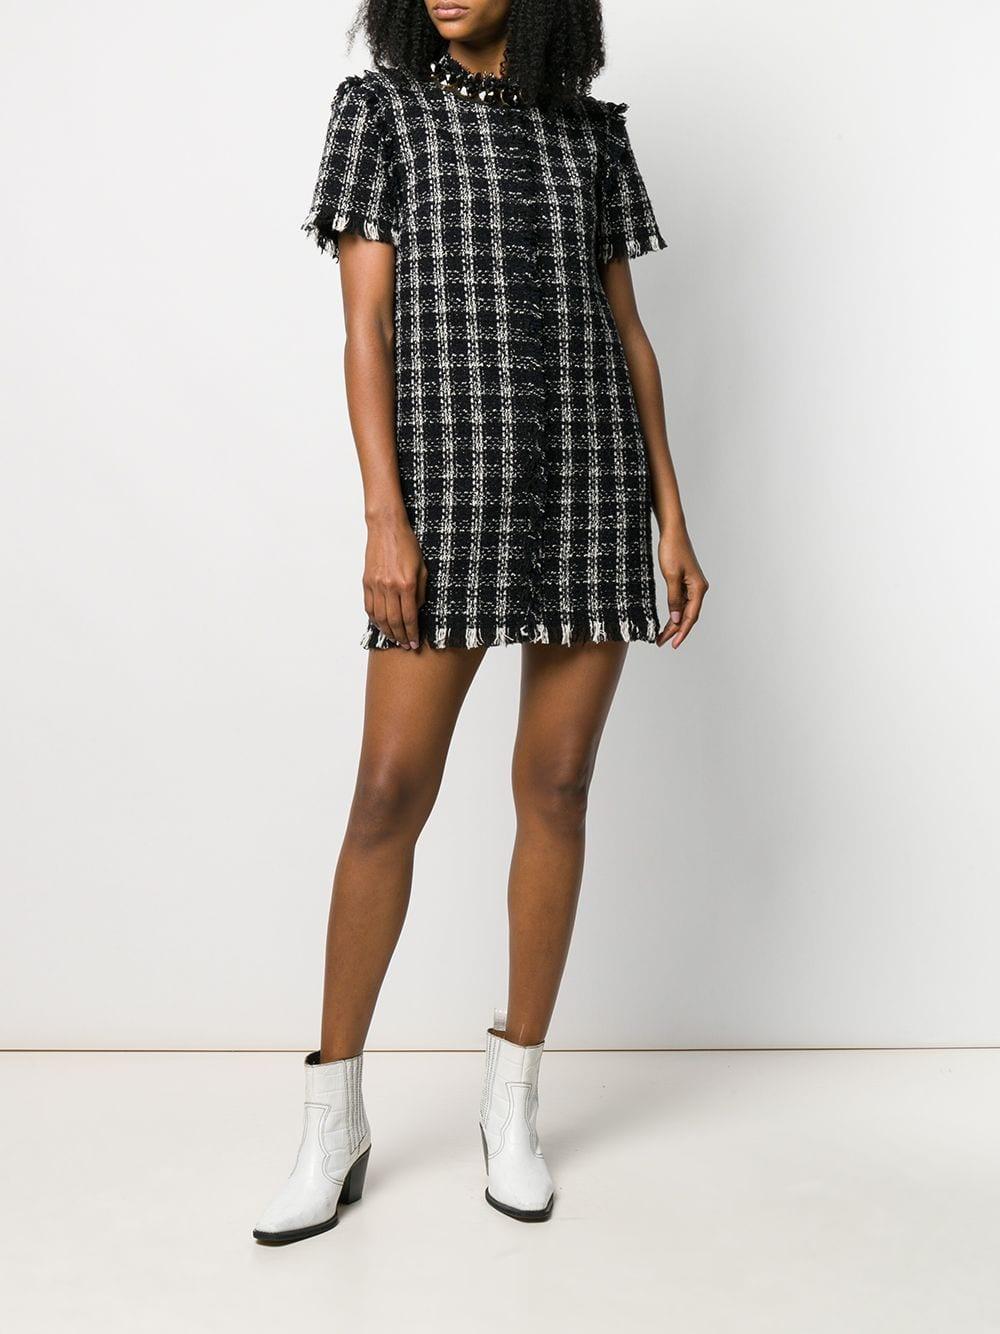 MSGM Synthetic Woven Dress in Black - Lyst